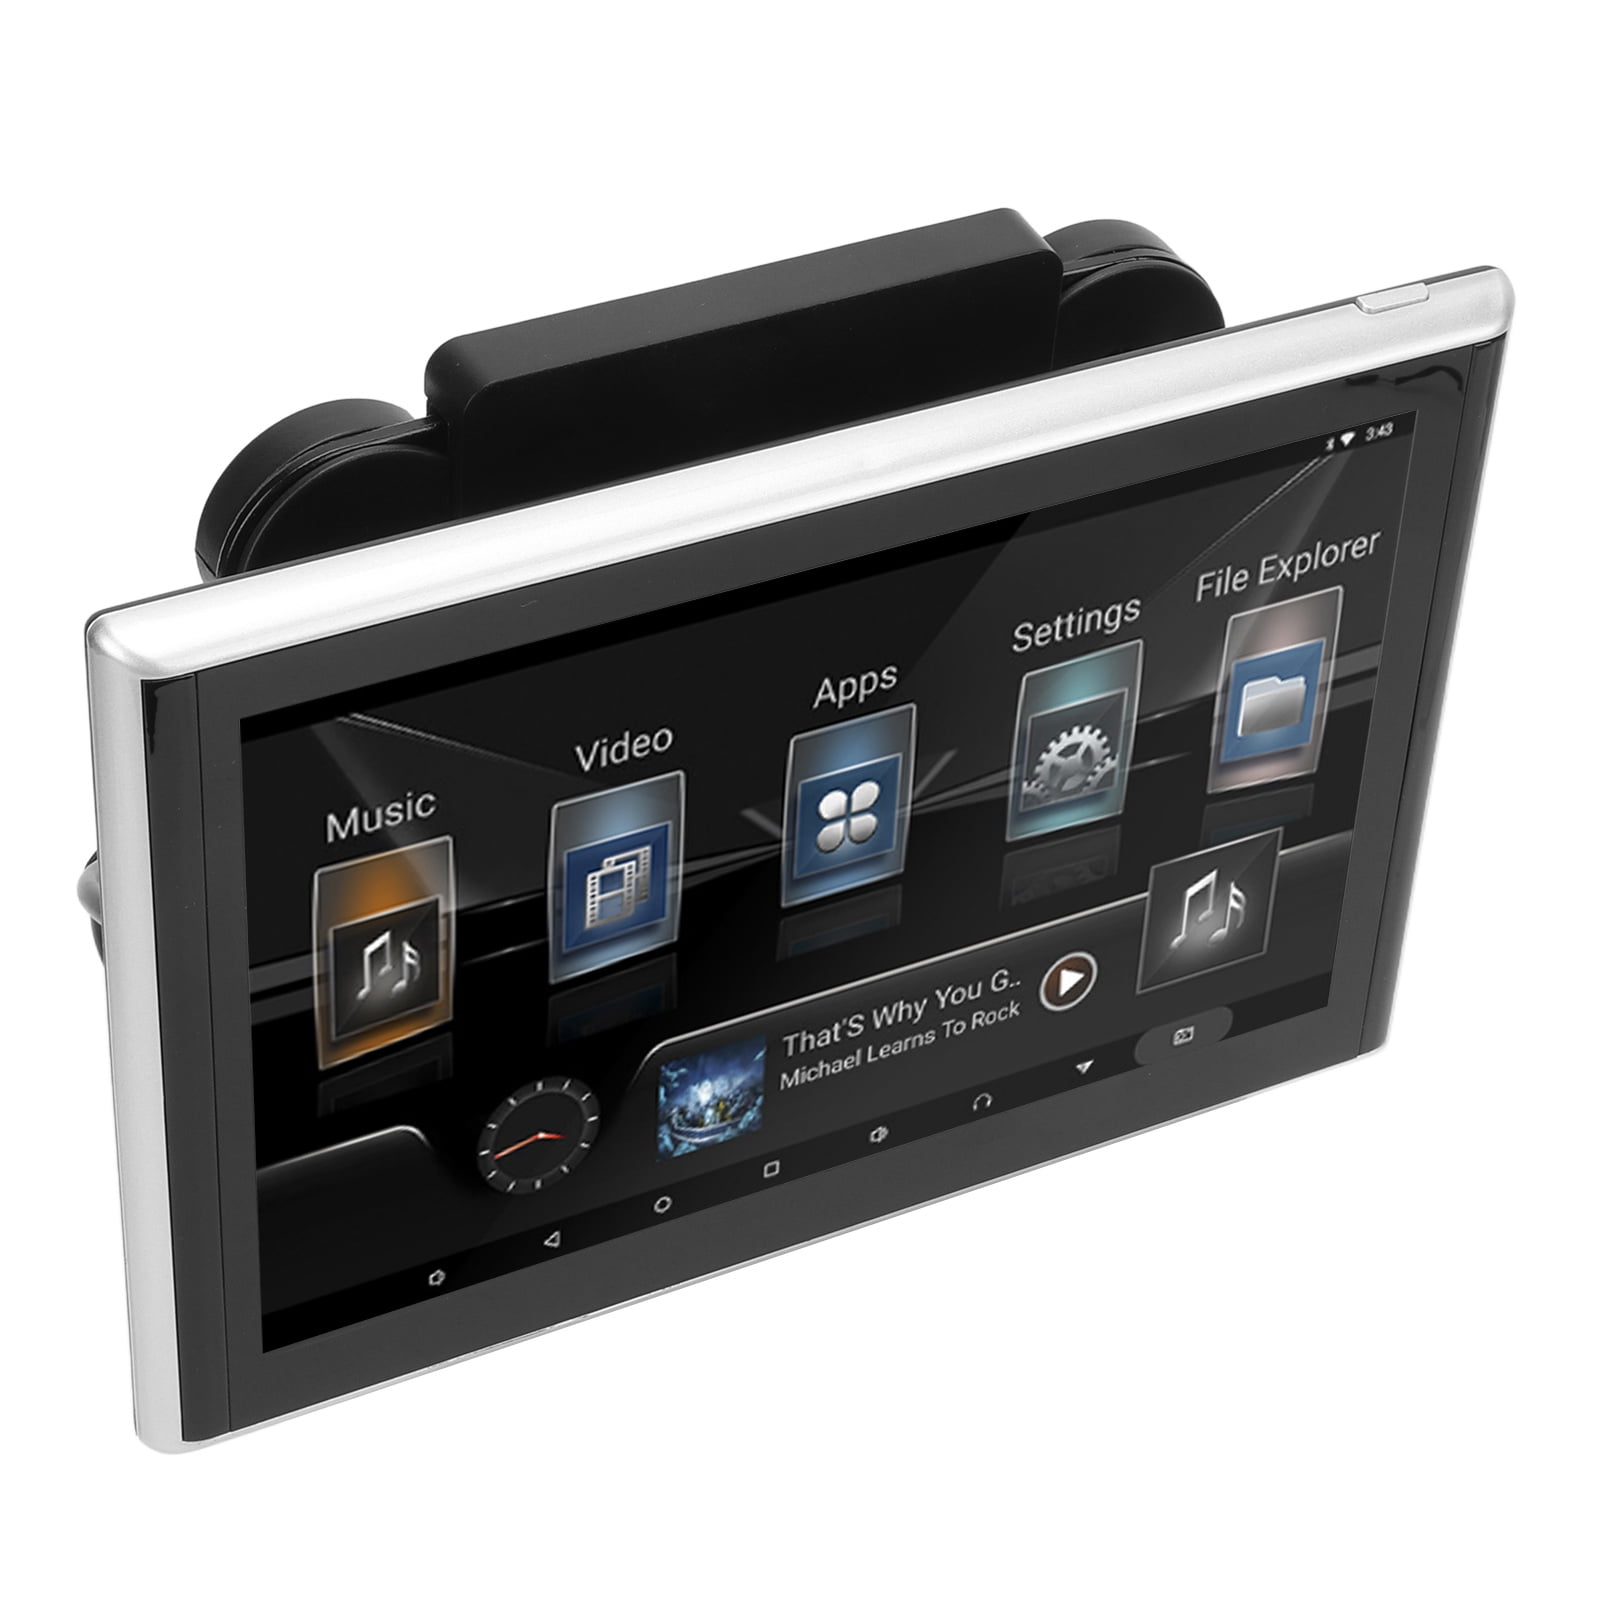 2g Support Xxx Video - Octpeak 9in Car Headrest Video Player HD 1920 X 1200 Touch Screen Support 2G  16G ROM For 9.0,Headrest Monitor,Car Headrest Video Player - Walmart.com